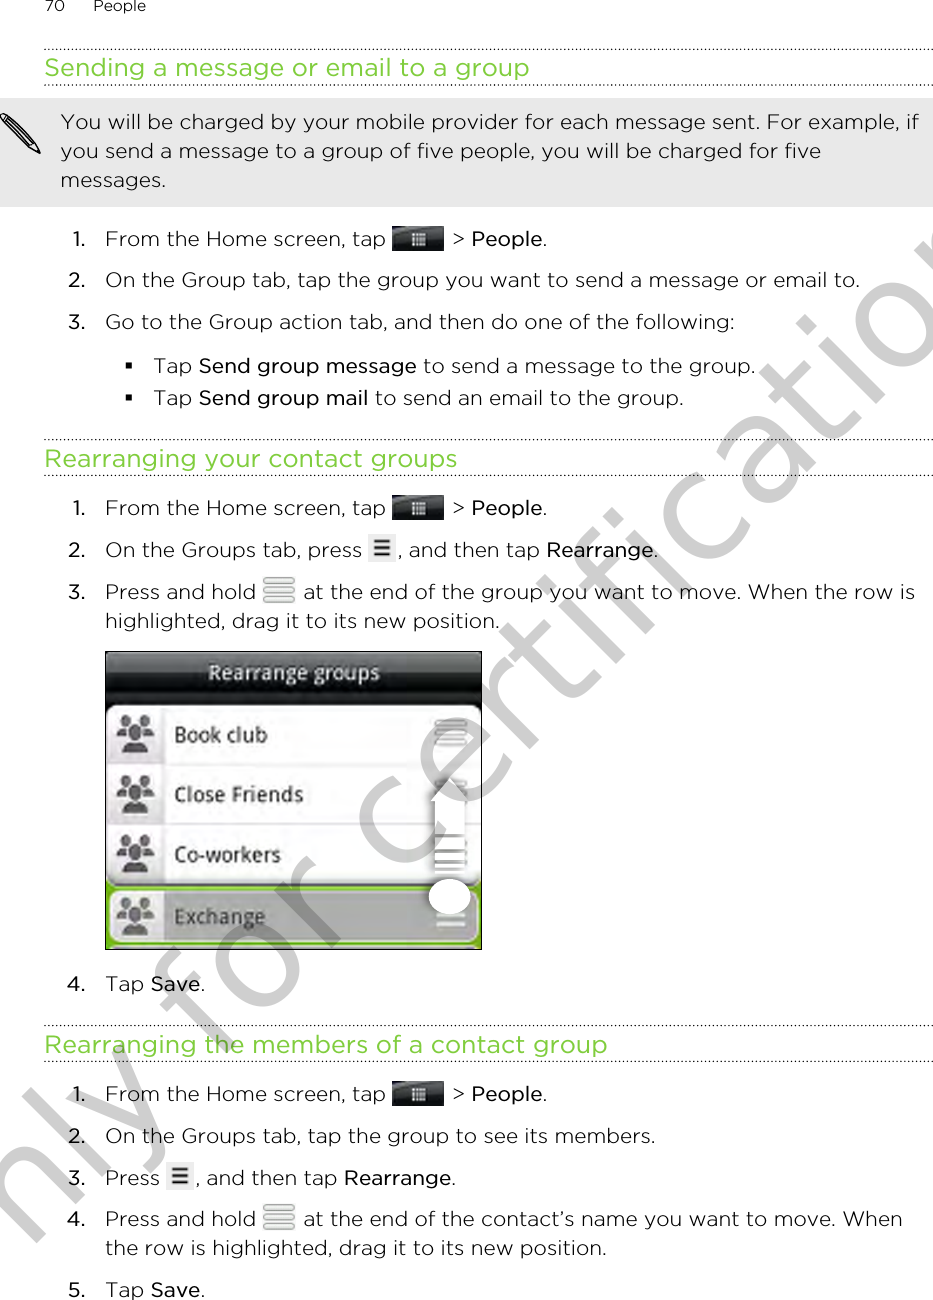 Sending a message or email to a groupYou will be charged by your mobile provider for each message sent. For example, ifyou send a message to a group of five people, you will be charged for fivemessages.1. From the Home screen, tap   &gt; People.2. On the Group tab, tap the group you want to send a message or email to.3. Go to the Group action tab, and then do one of the following:§Tap Send group message to send a message to the group.§Tap Send group mail to send an email to the group.Rearranging your contact groups1. From the Home screen, tap   &gt; People.2. On the Groups tab, press  , and then tap Rearrange.3. Press and hold   at the end of the group you want to move. When the row ishighlighted, drag it to its new position. 4. Tap Save.Rearranging the members of a contact group1. From the Home screen, tap   &gt; People.2. On the Groups tab, tap the group to see its members.3. Press  , and then tap Rearrange.4. Press and hold   at the end of the contact’s name you want to move. Whenthe row is highlighted, drag it to its new position.5. Tap Save.70 PeopleOnly for certification